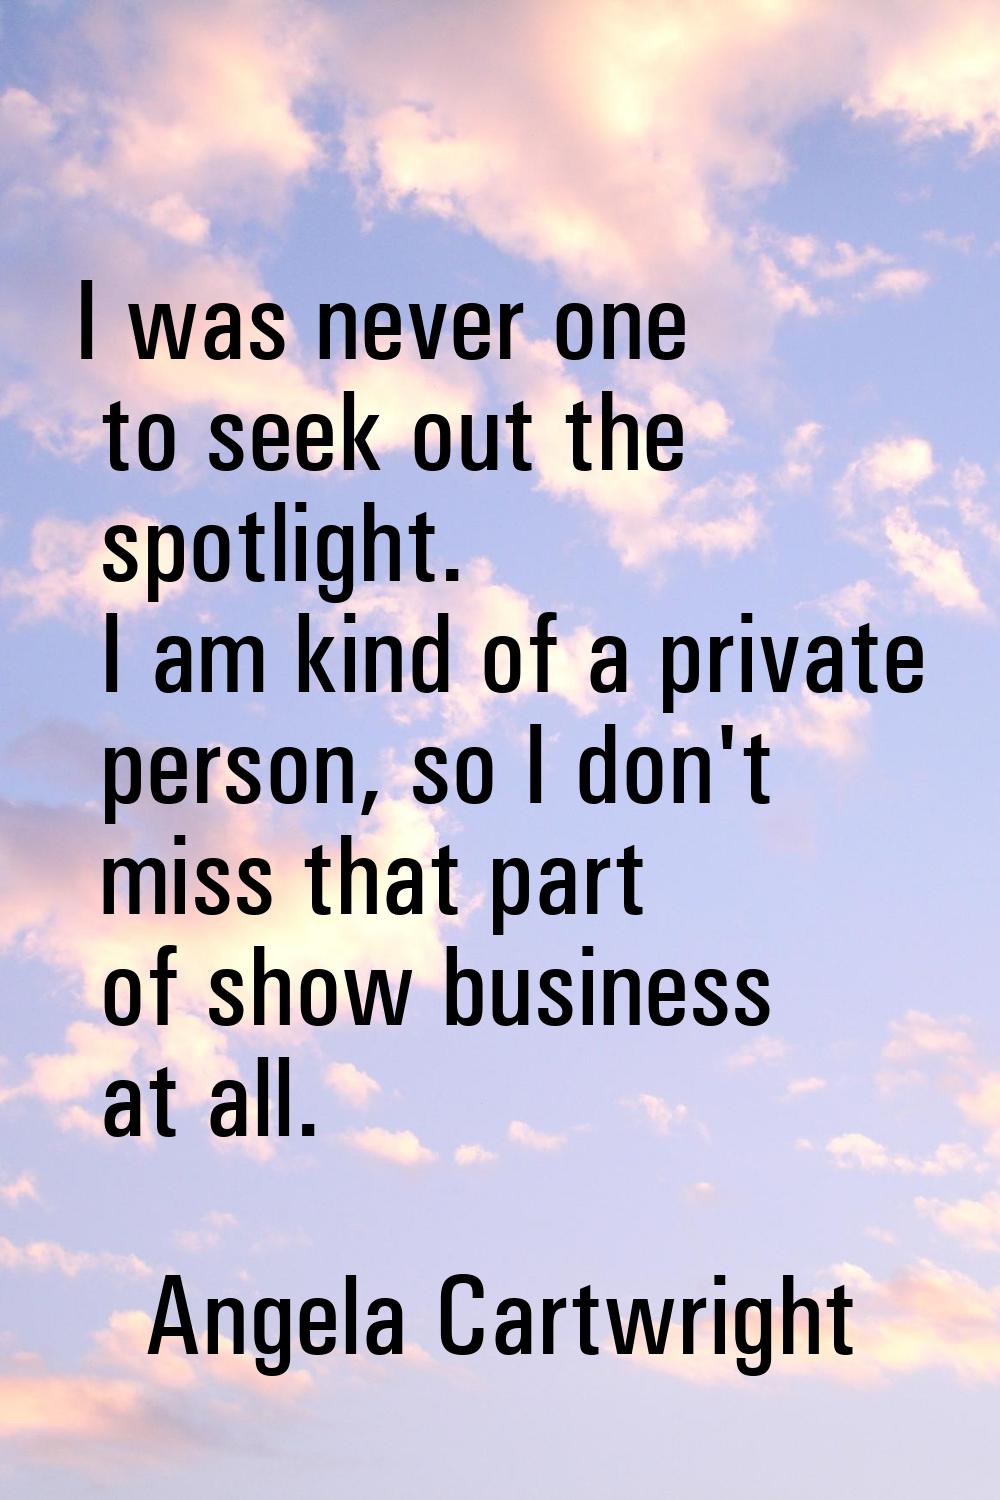 I was never one to seek out the spotlight. I am kind of a private person, so I don't miss that part